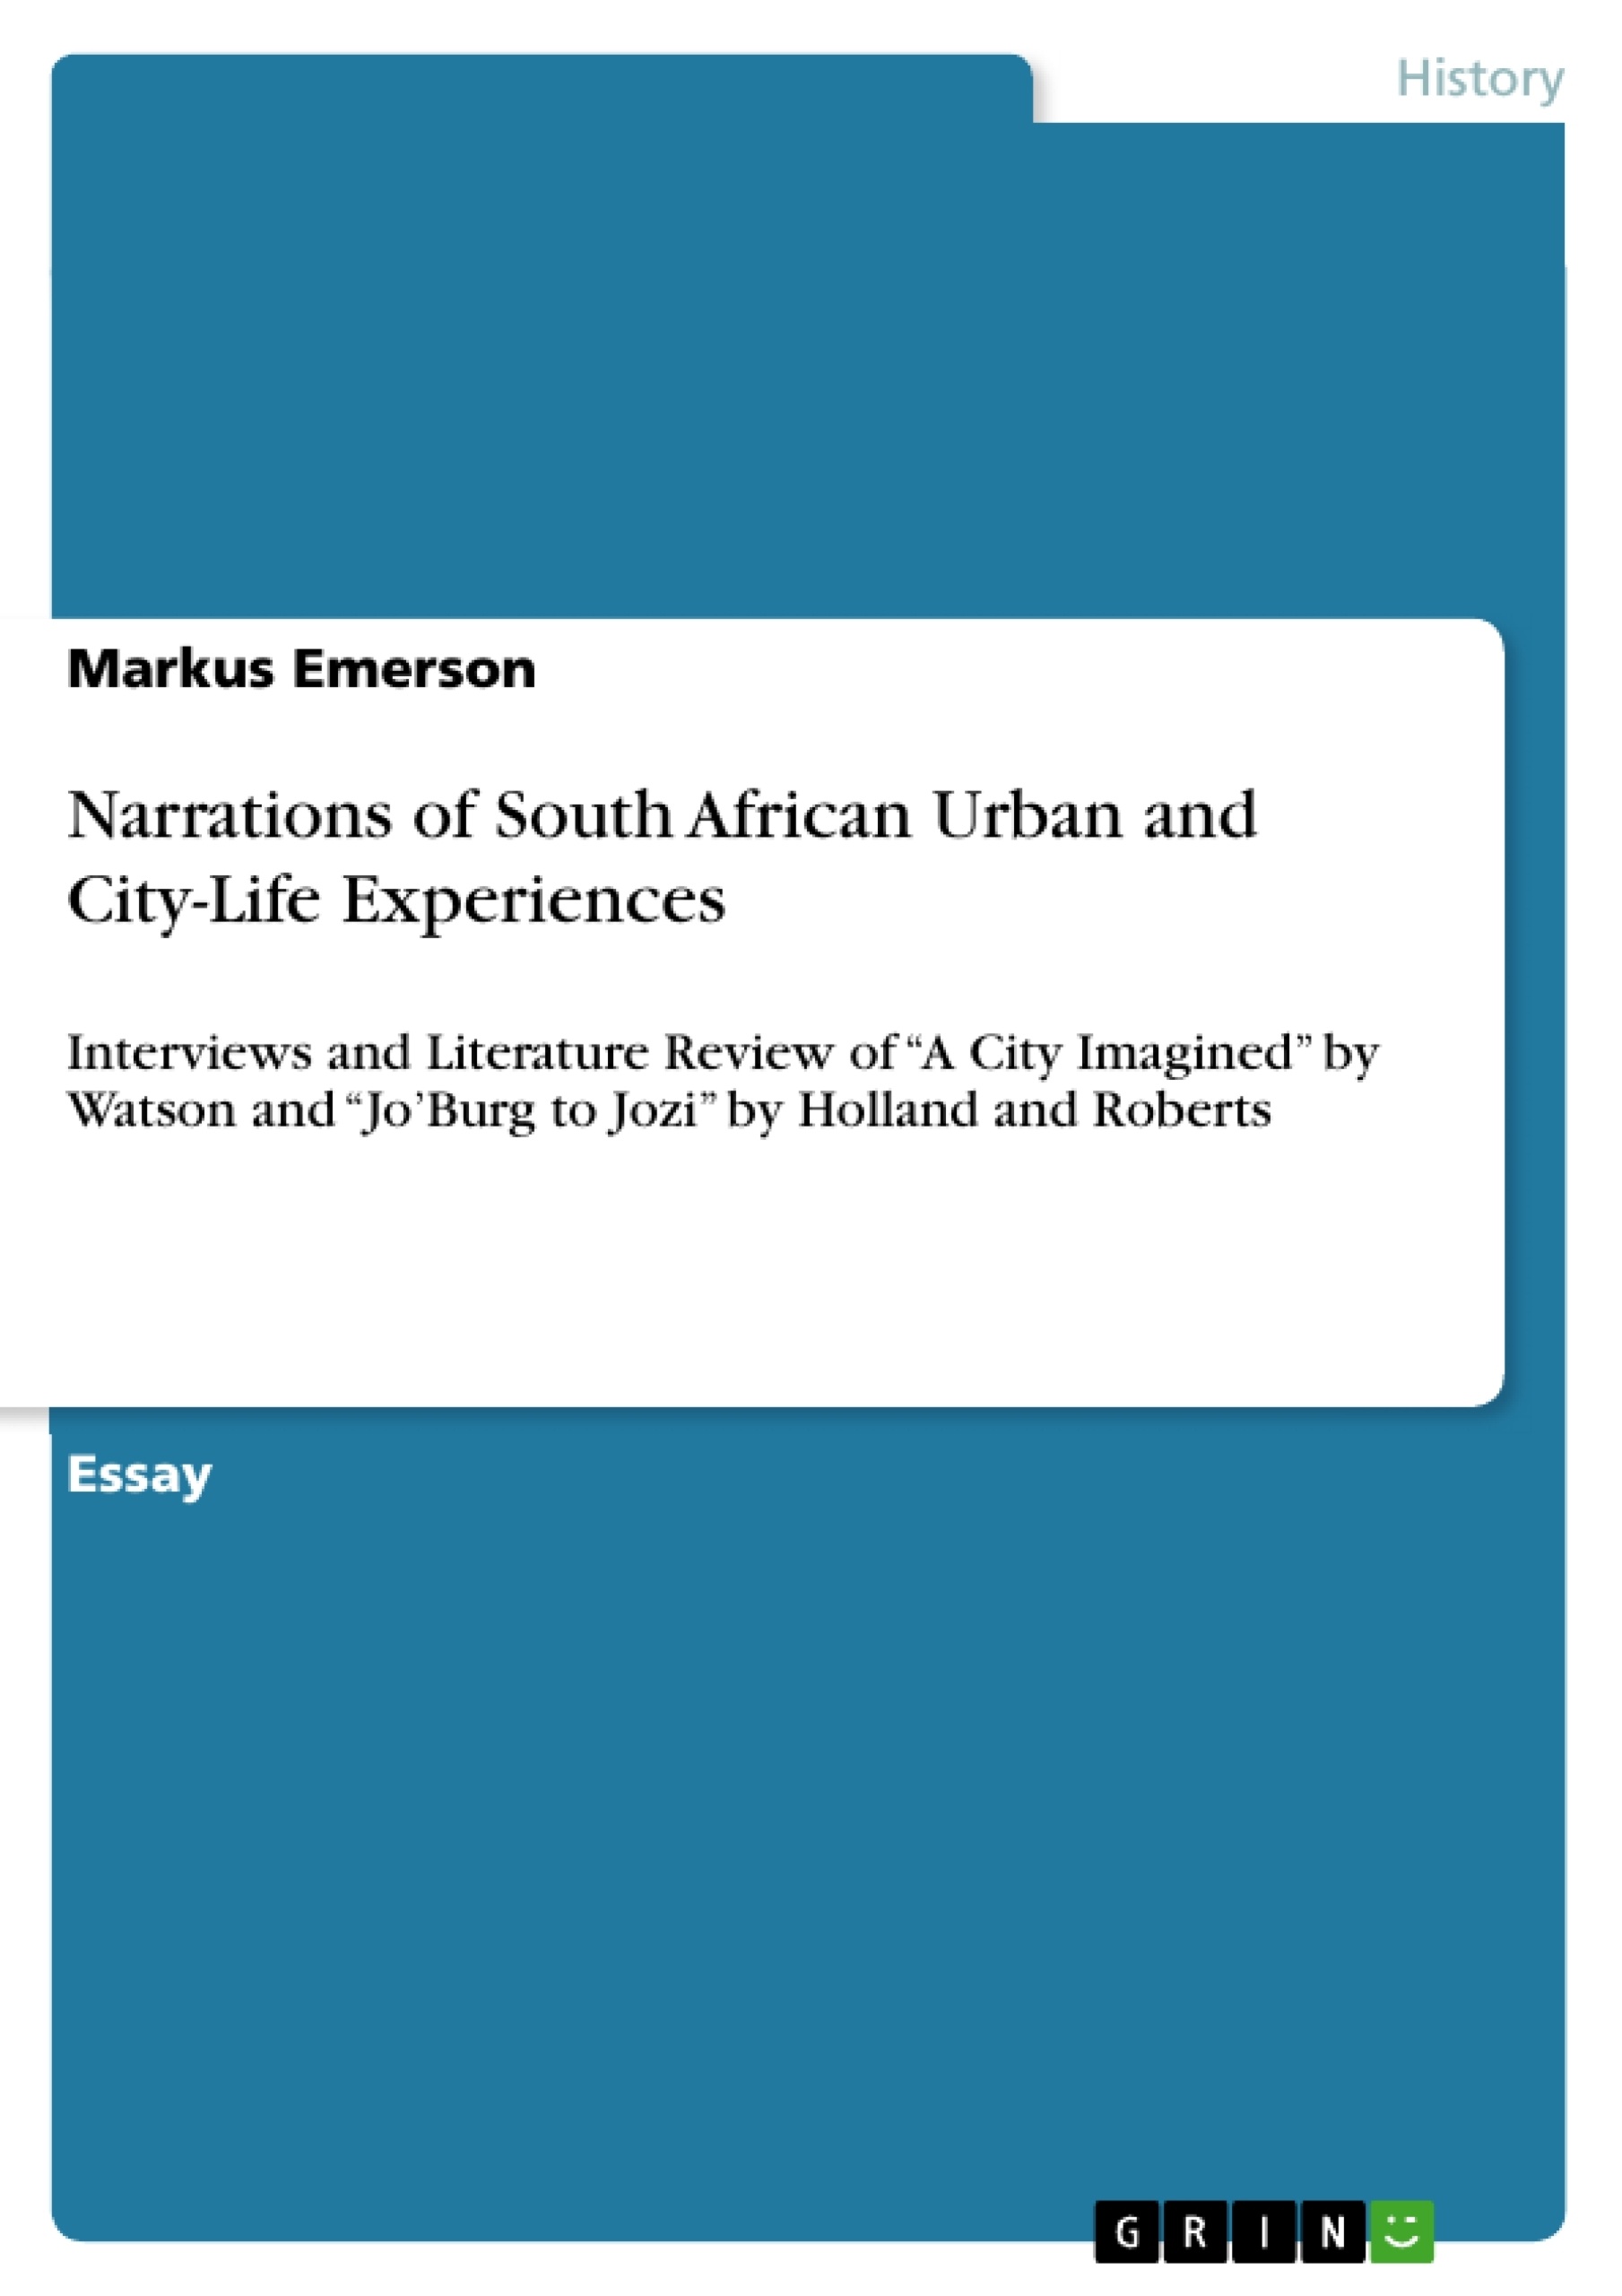 Título: Narrations of South African Urban and City-Life Experiences